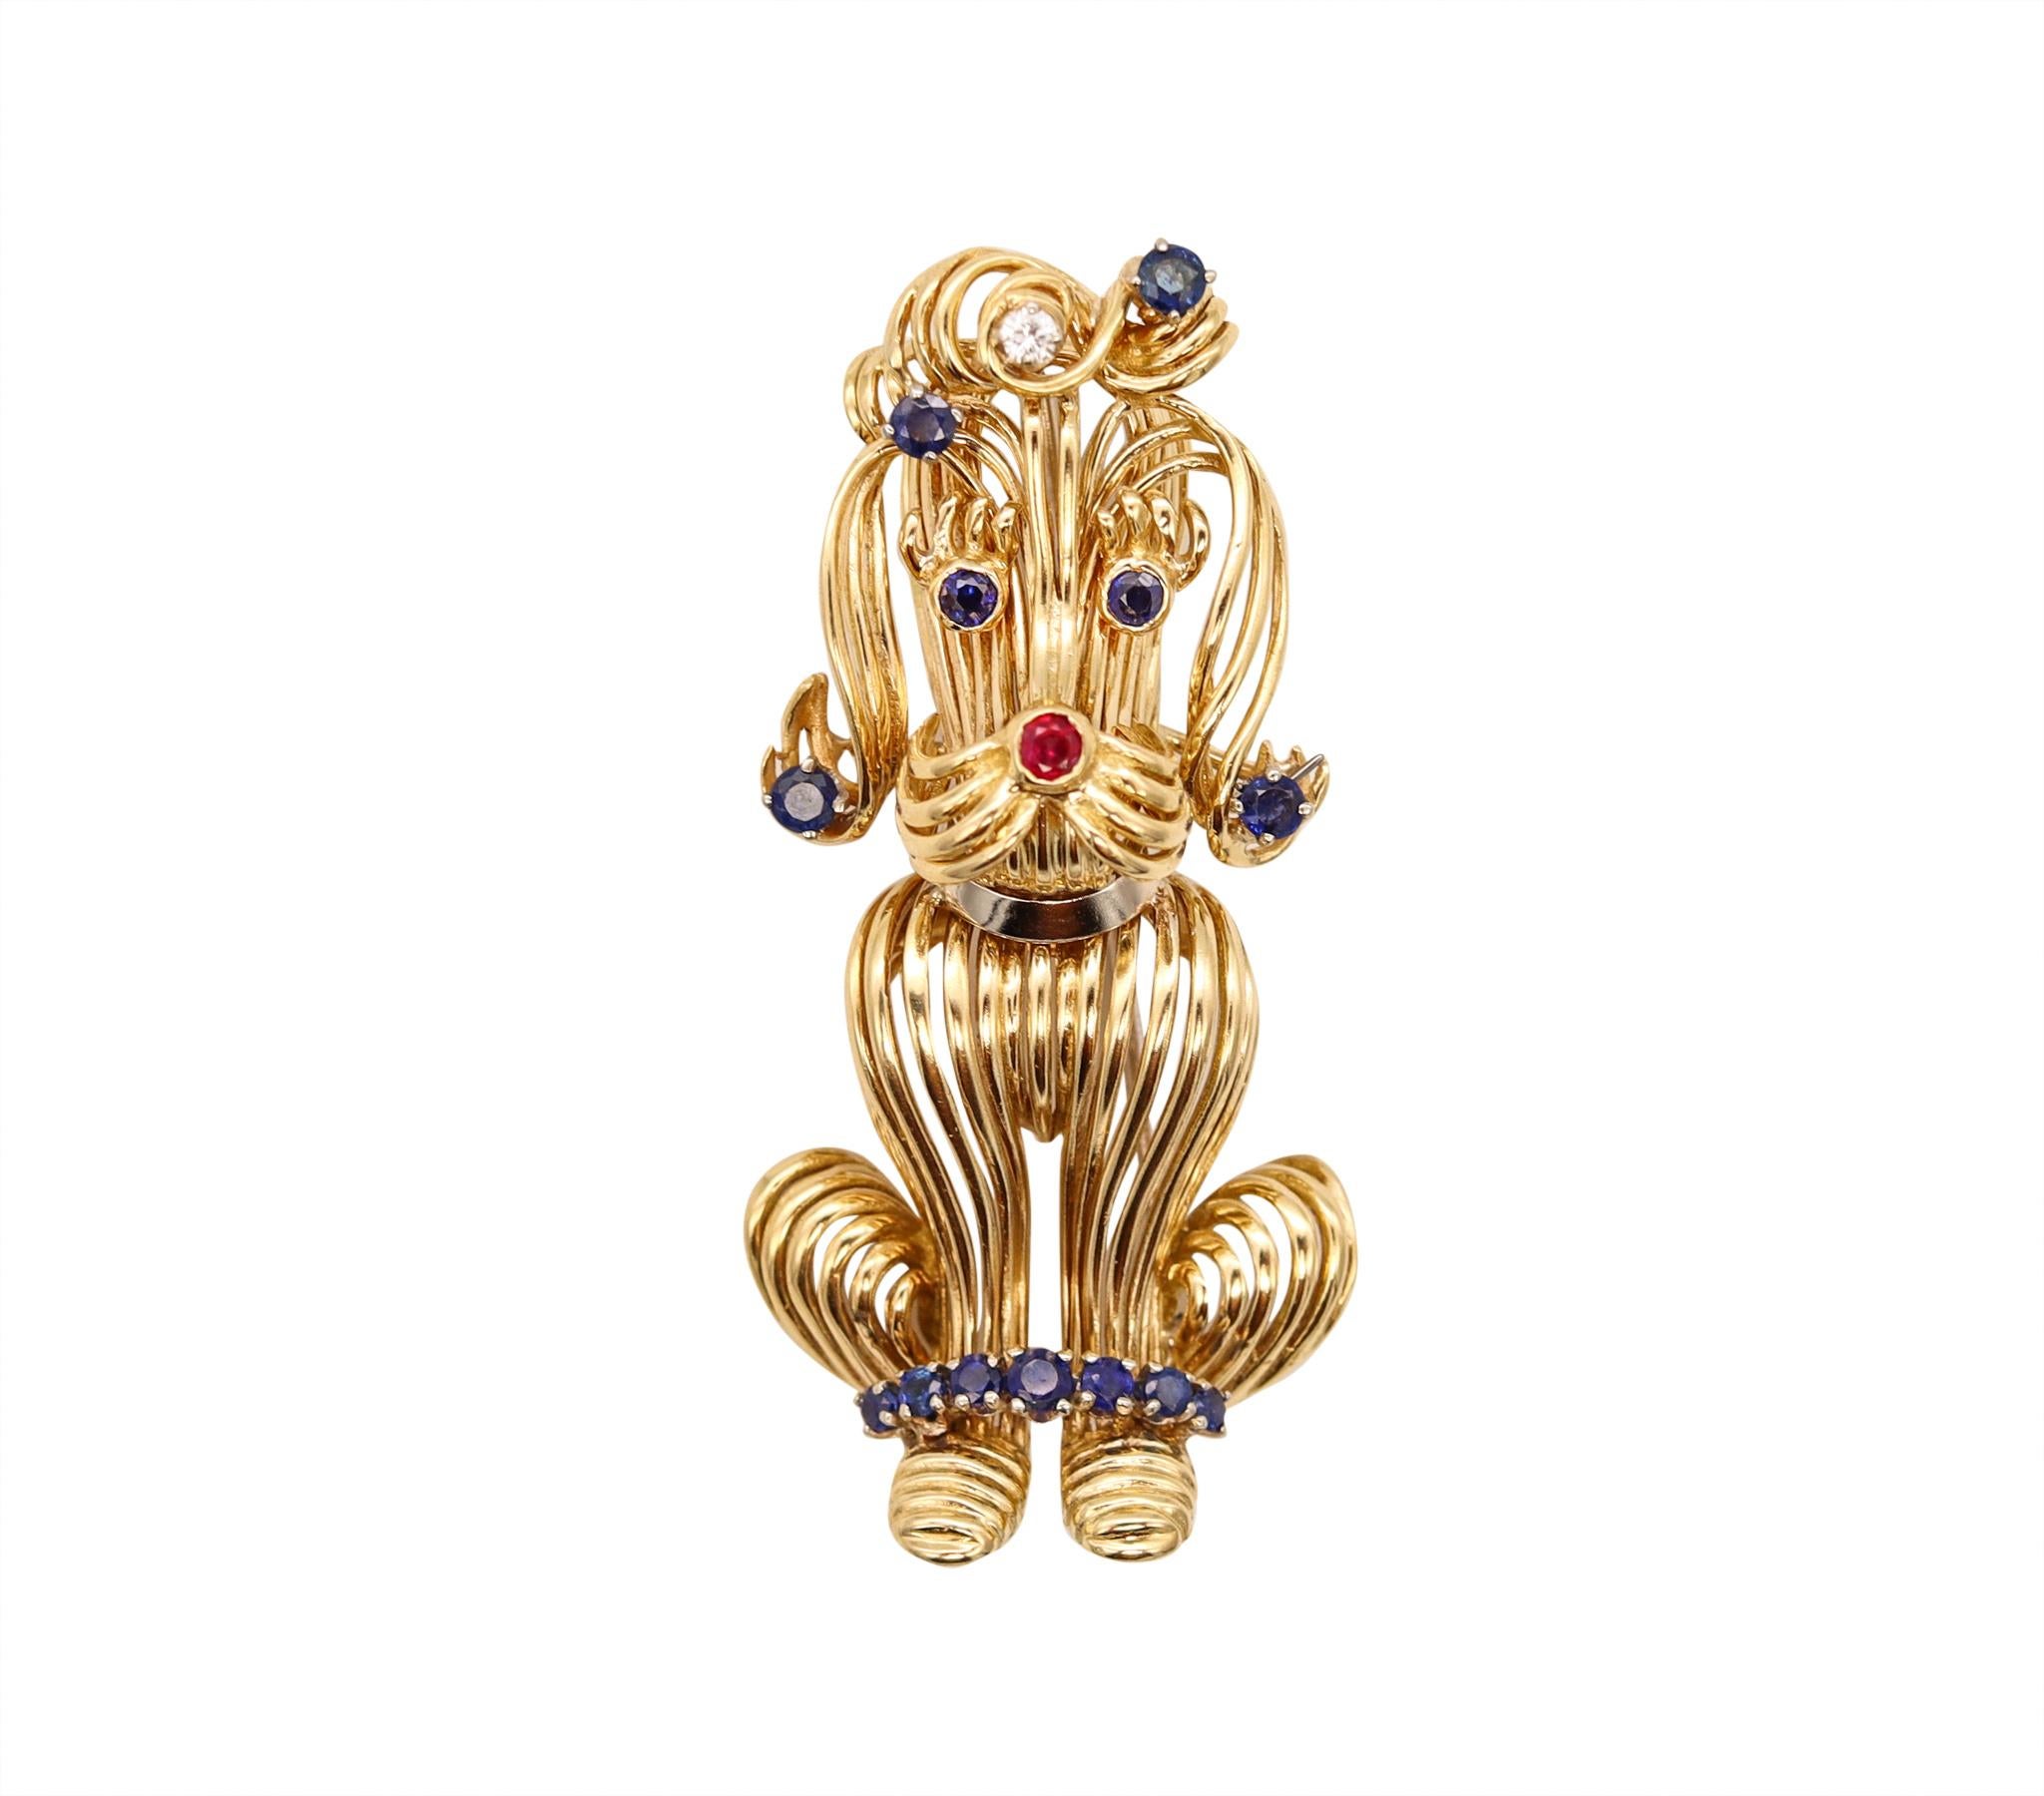 Gem set Dog brooch designed by Tiffany & Co.

A three-dimensional sculptural piece created at the Tiffany studios in New York city during the late mid-century period between the 1960 and 1970. This unique seated doggy brooch has been carefully